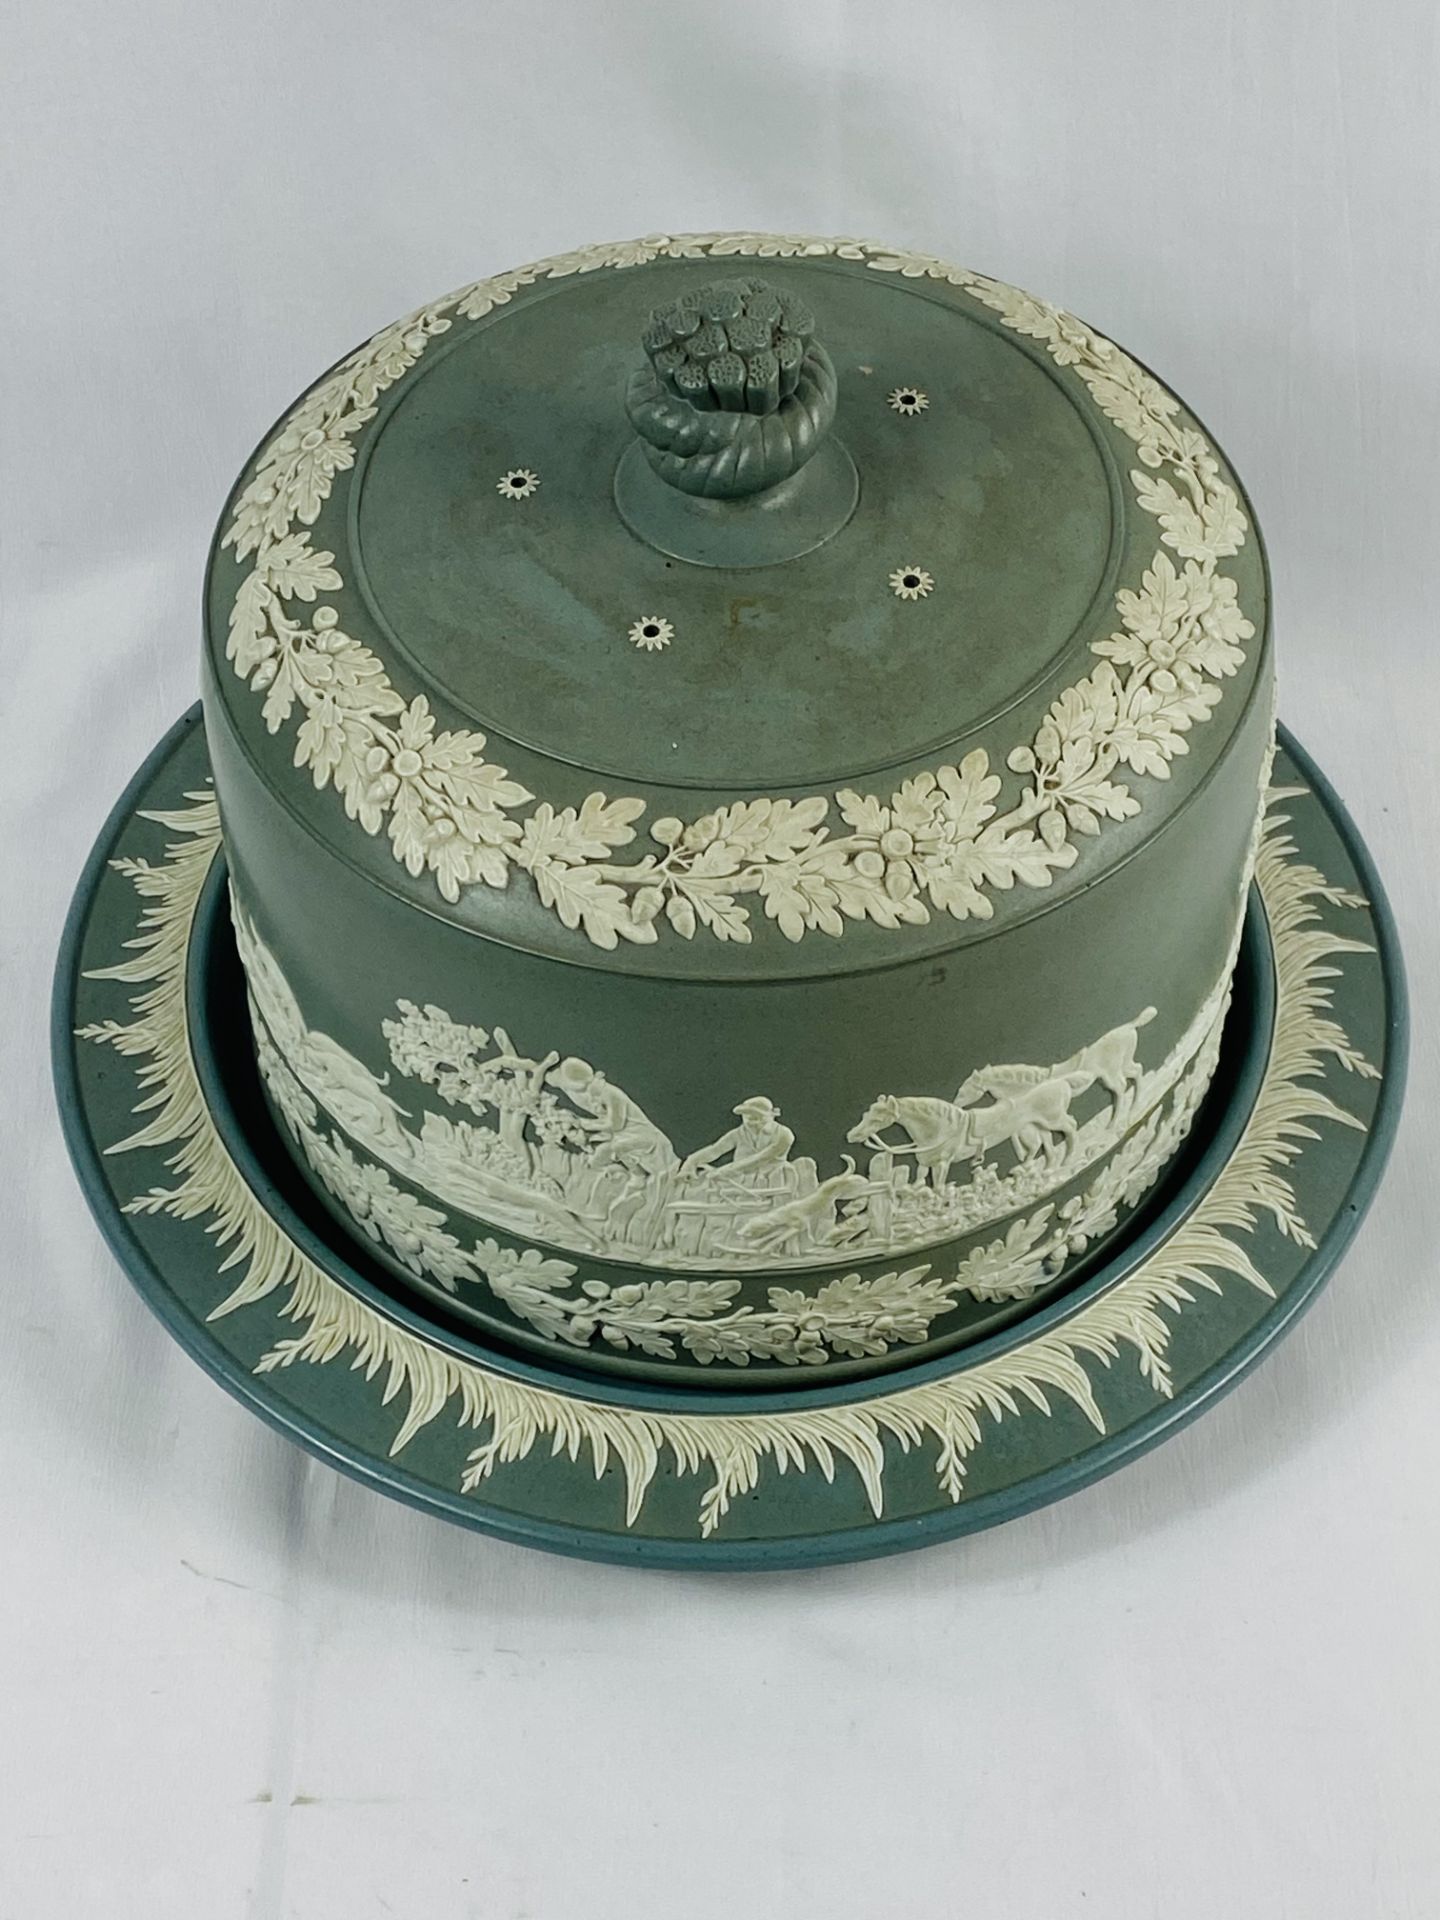 Wedgwood style cheese cloche - Image 6 of 7